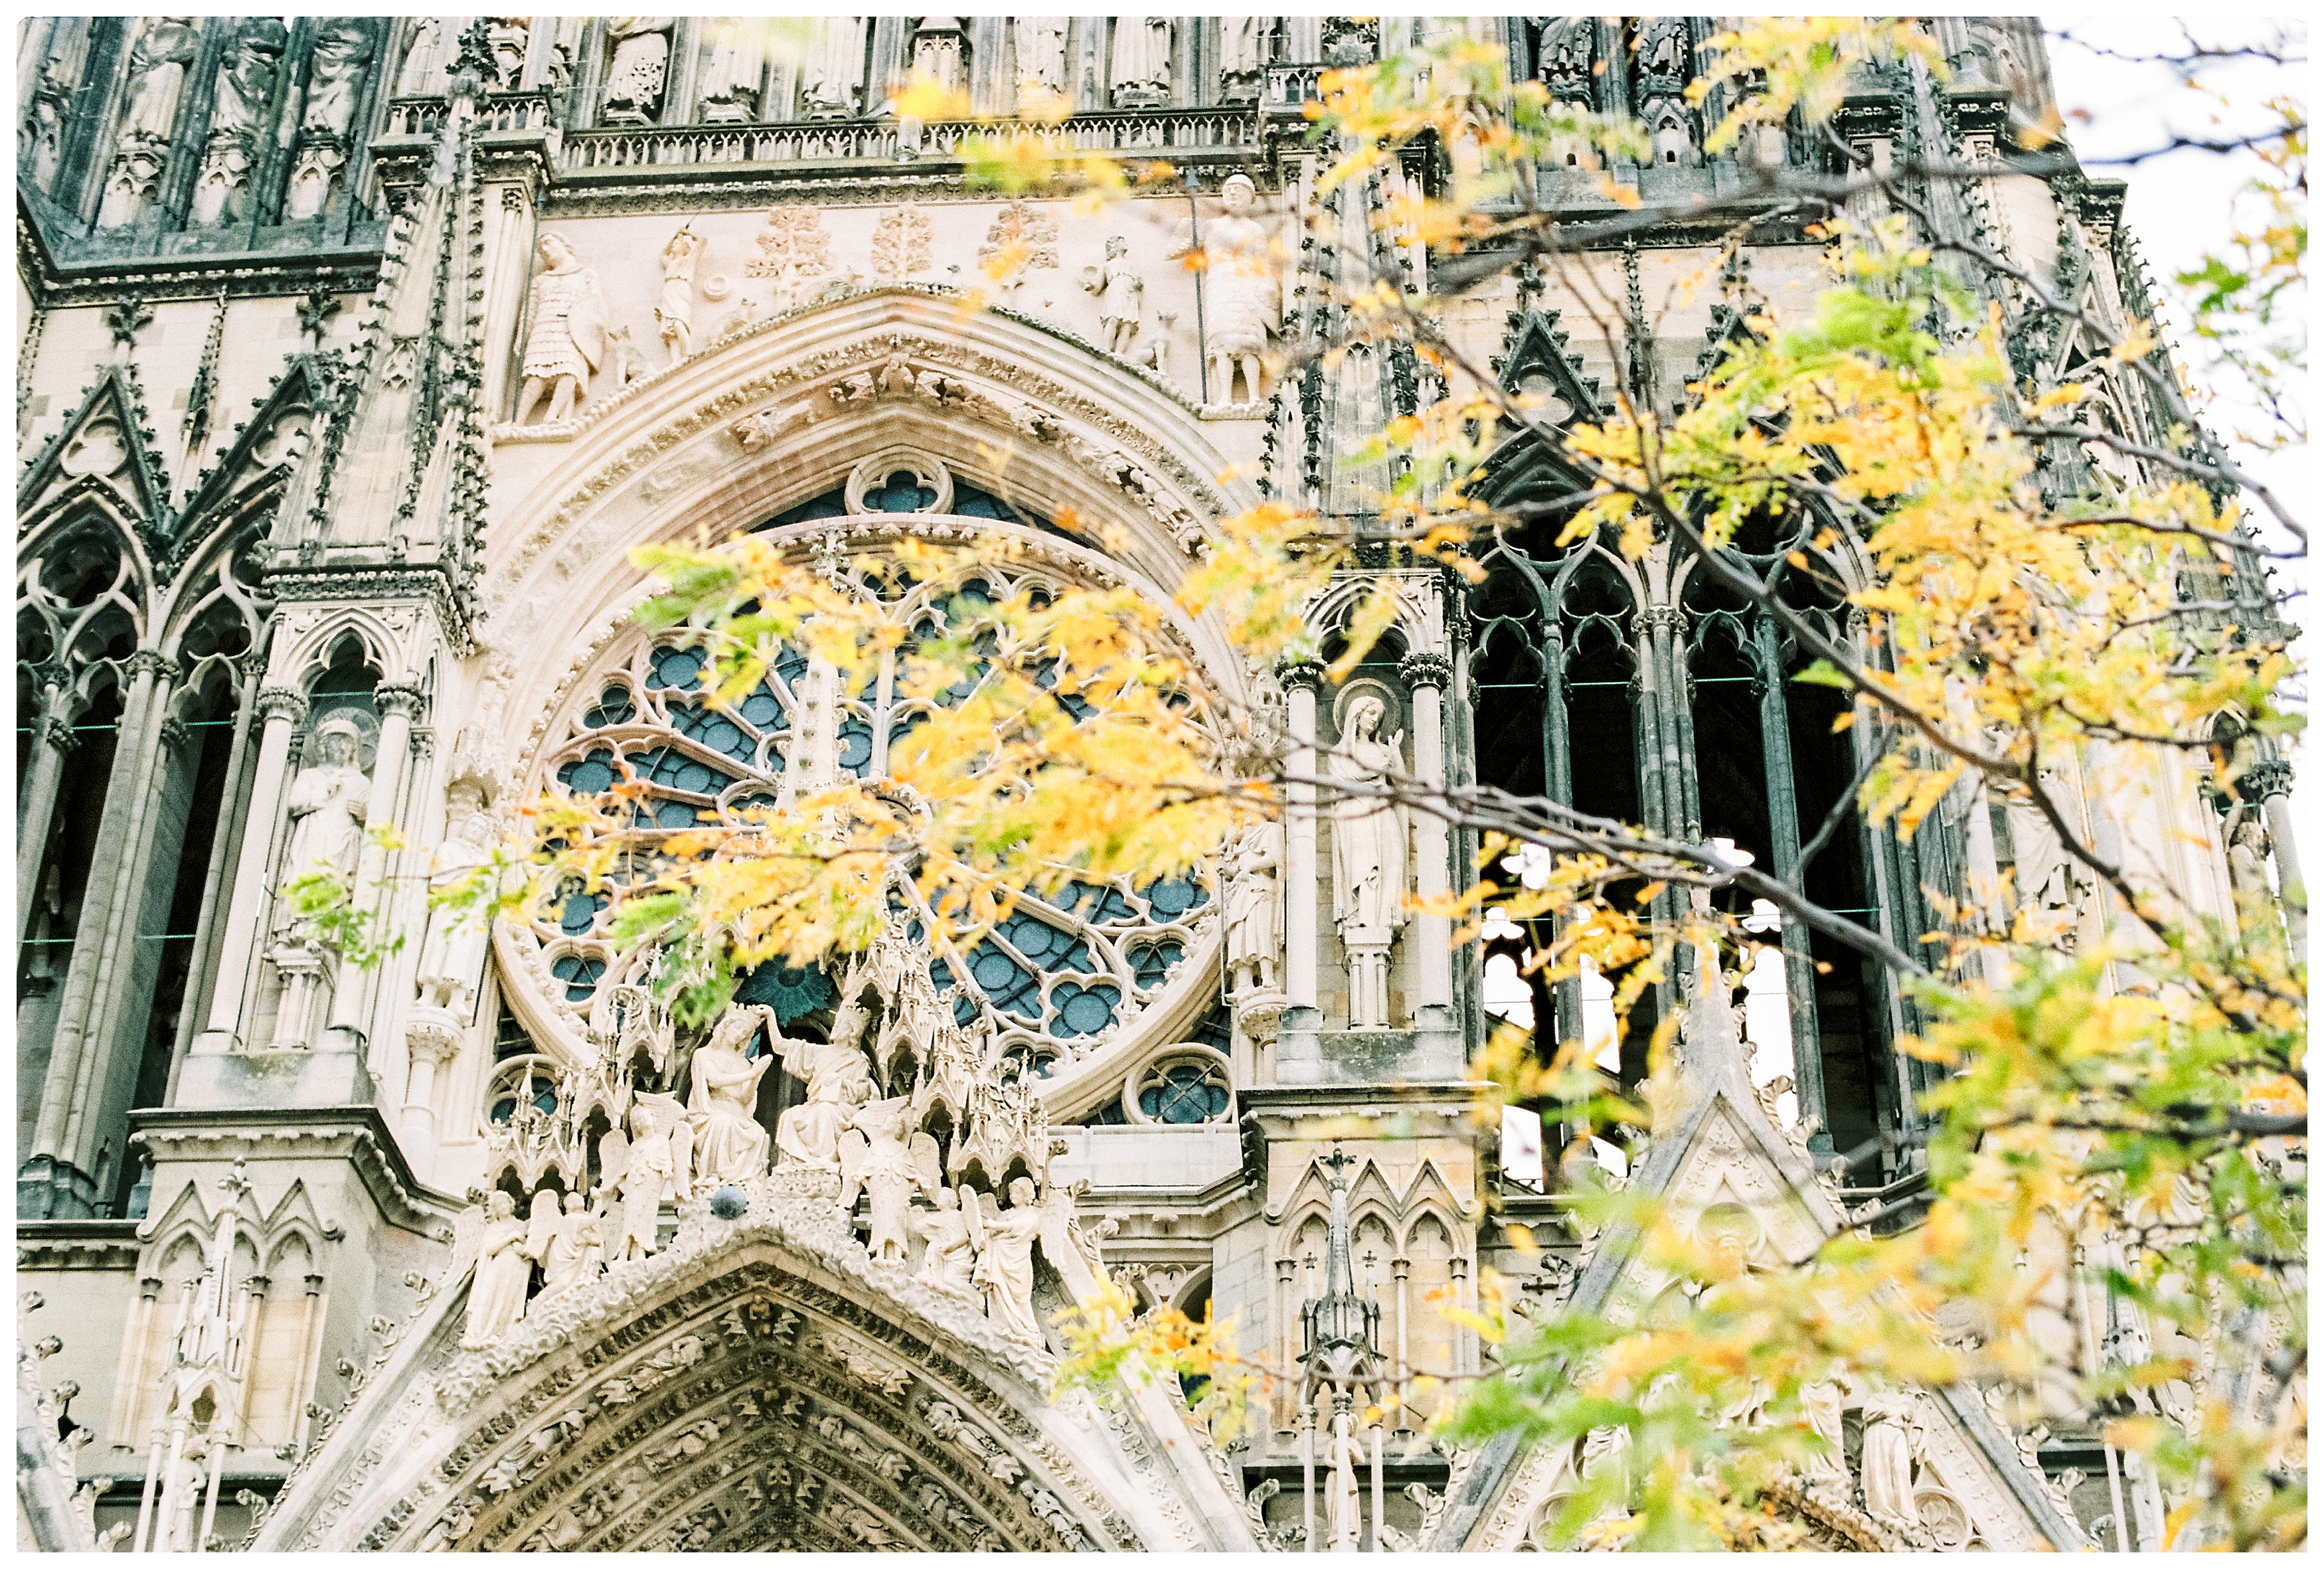 the facade of the reims cathedral in france